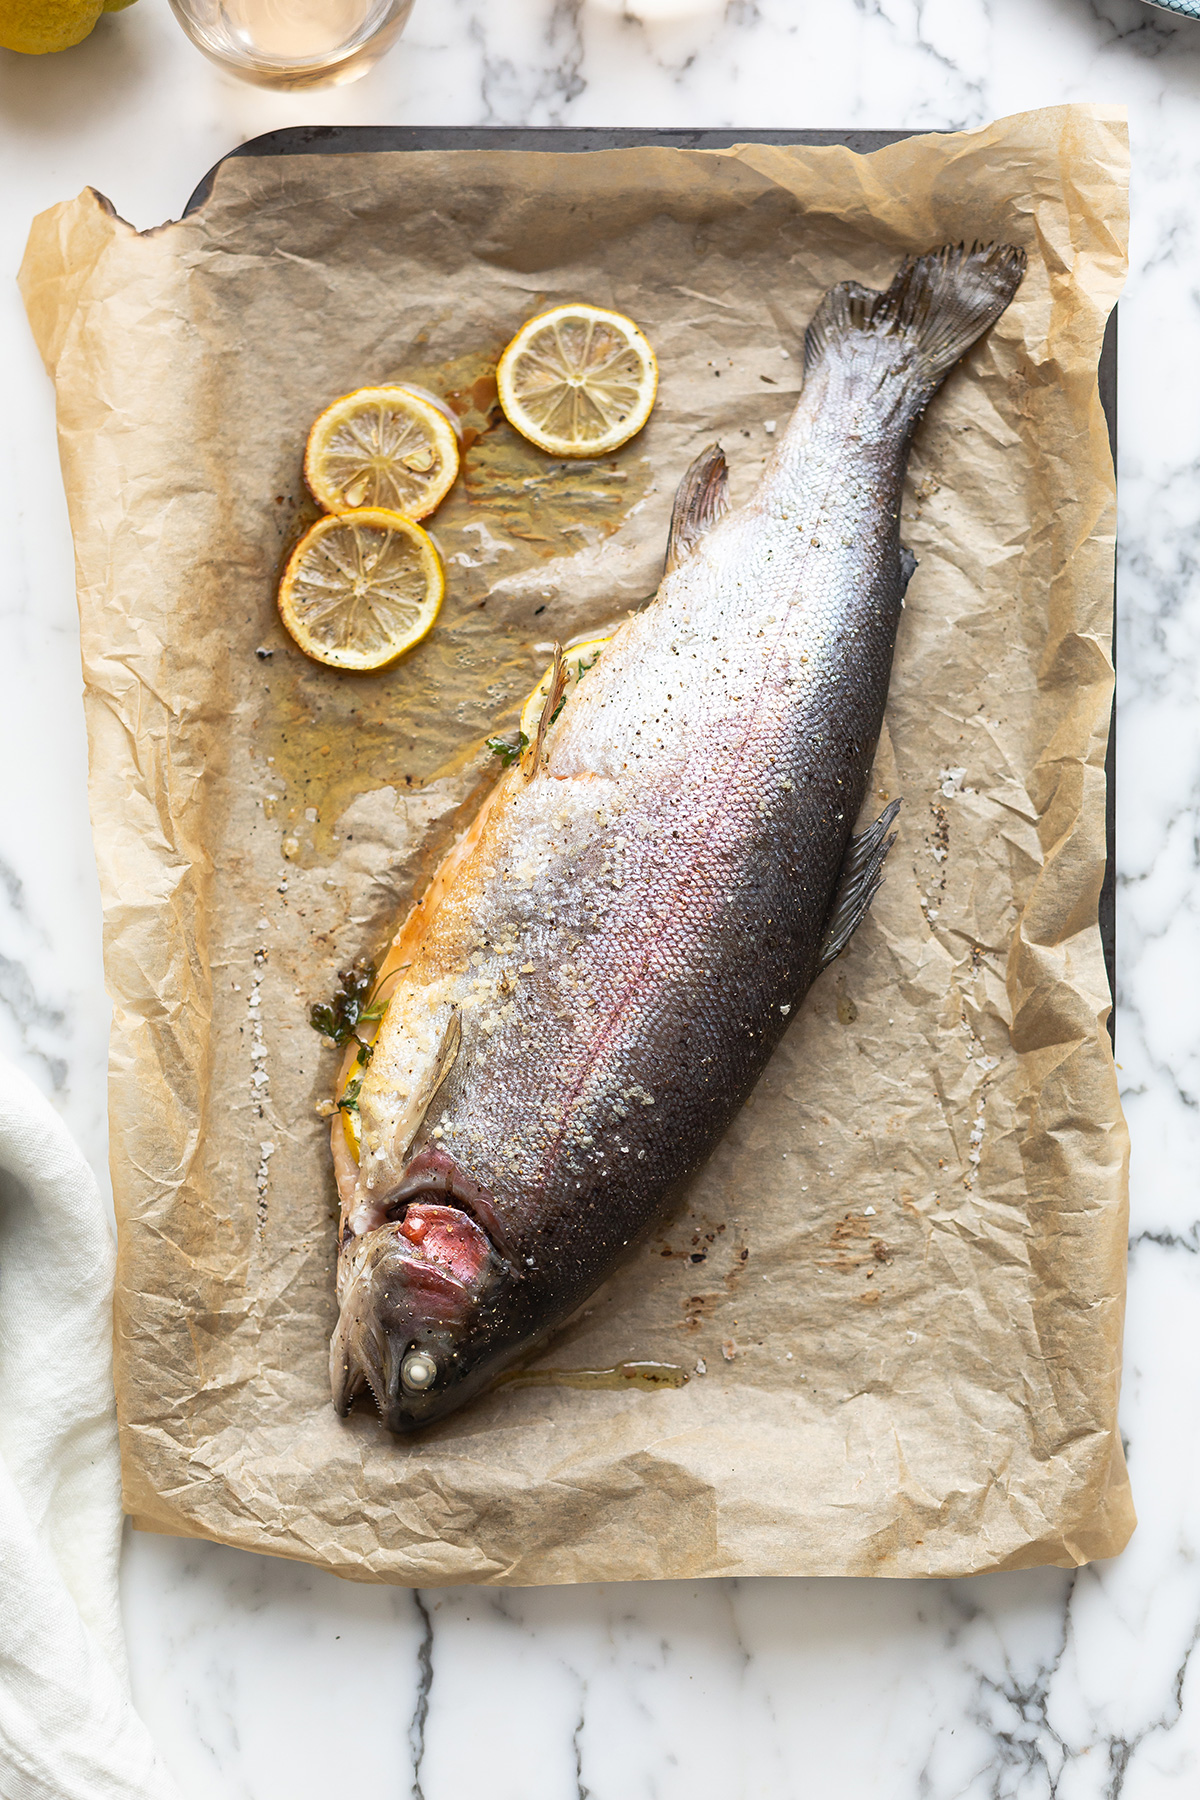 A whole roasted rainbow trout on a baking tray with roasted lemon